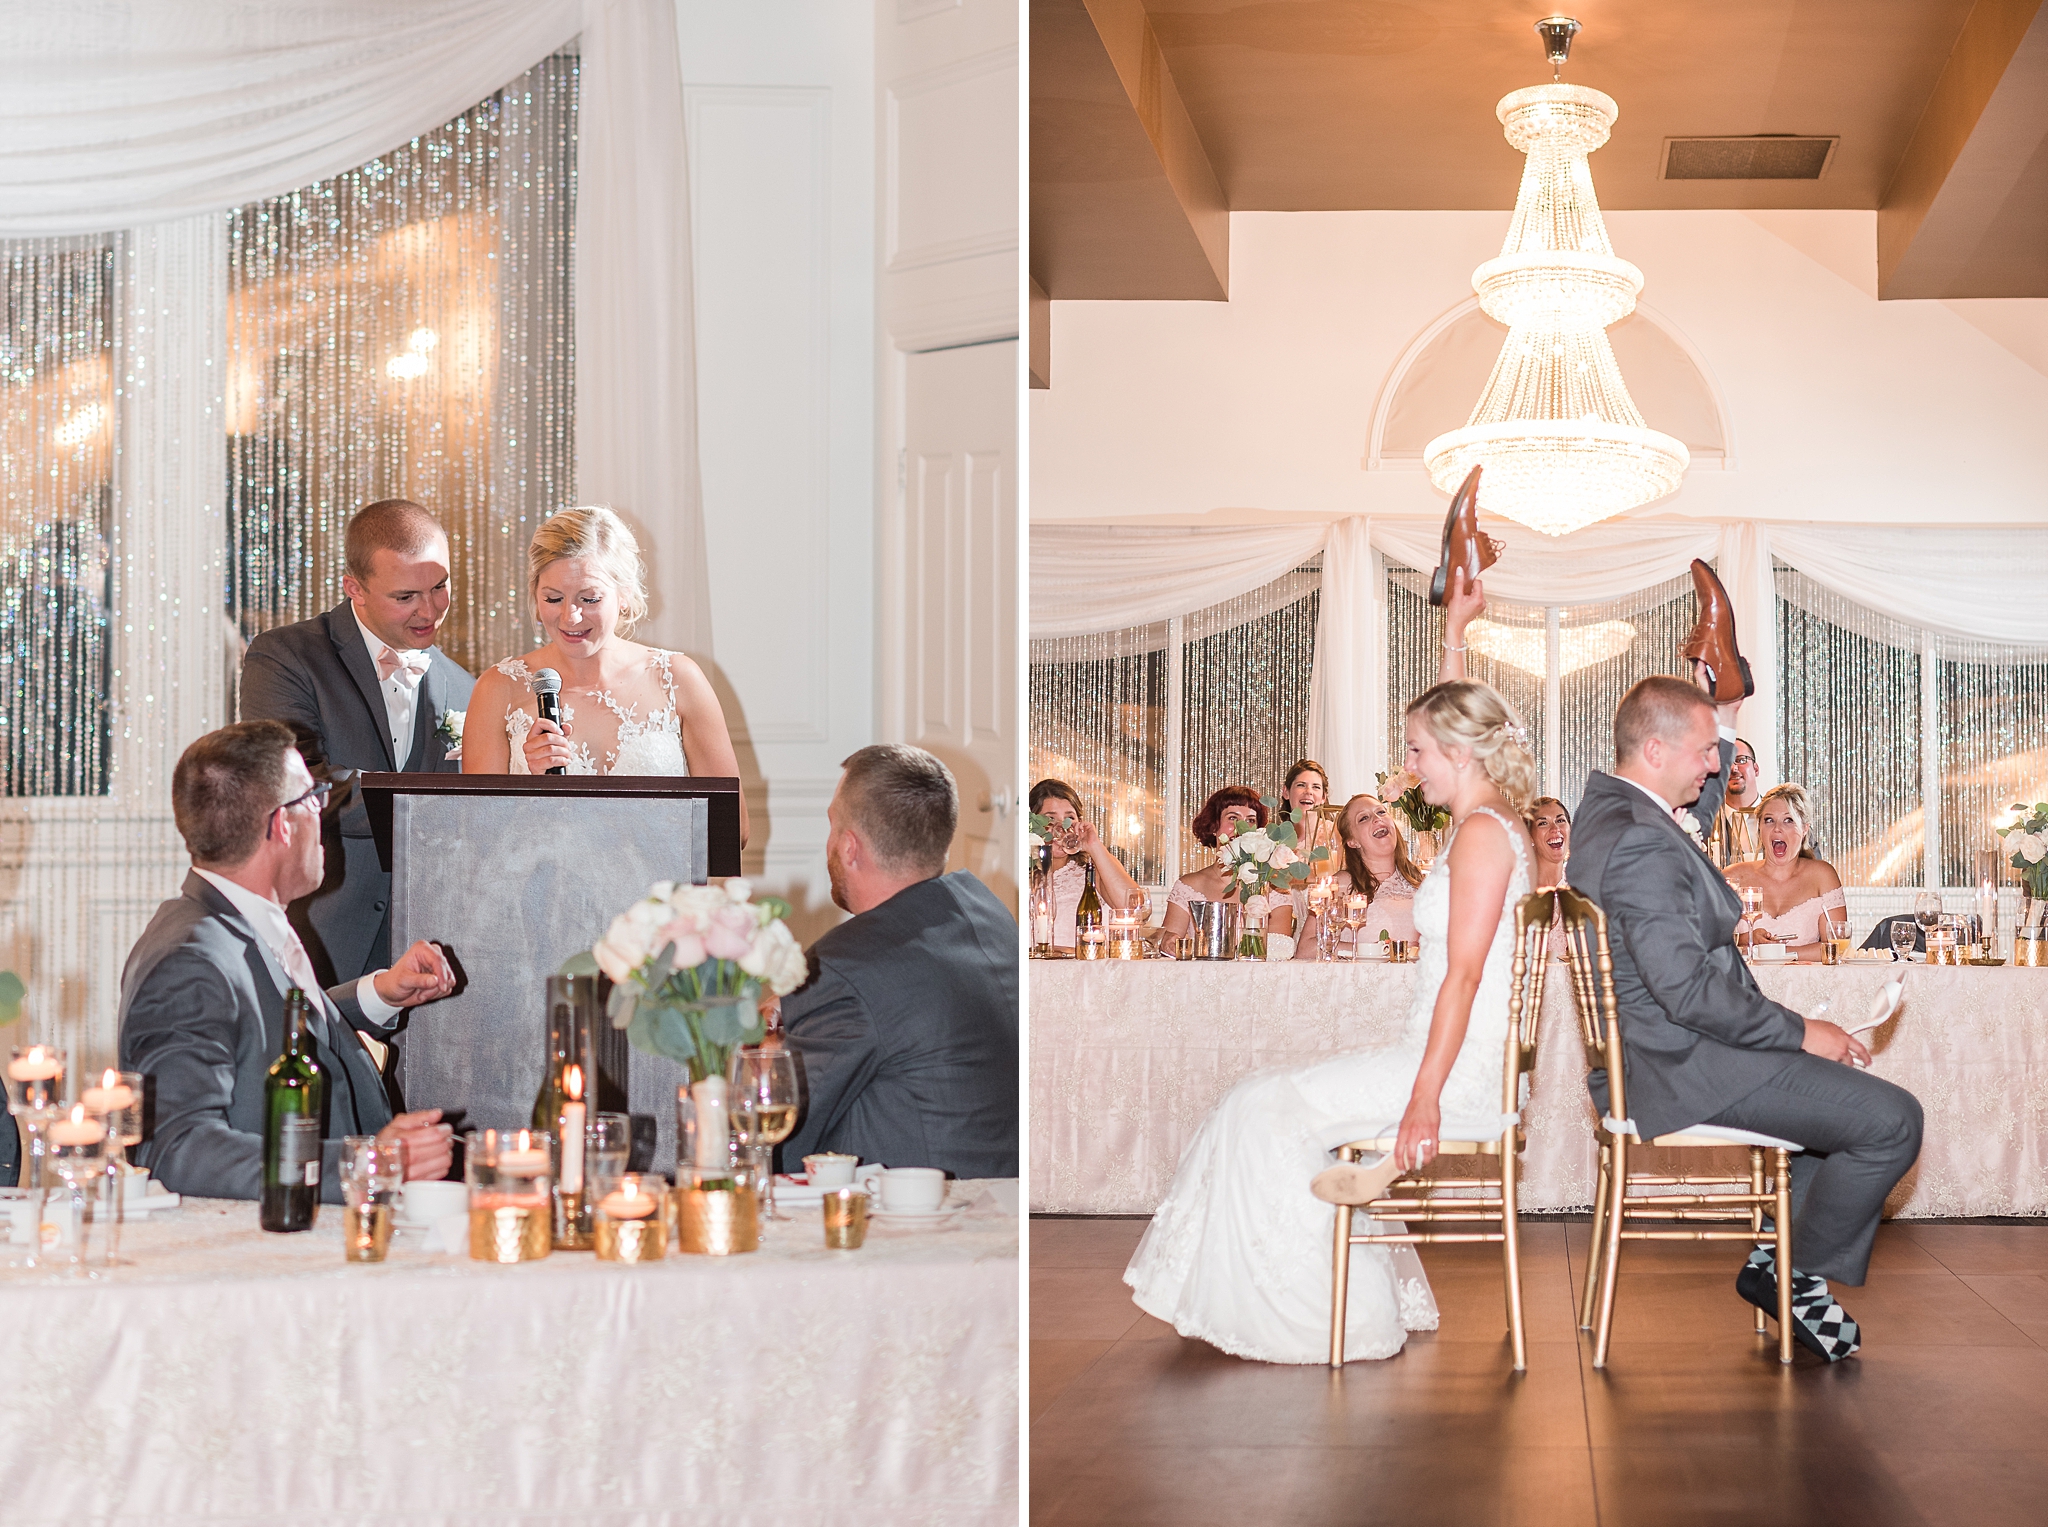 Legant blush & gold timeless wedding at orchardview wedding and conference centre | ottawa wedding get more inspiration from this fun summertime wedding. #ottawawedding #weddingphotography #ottawaweddings